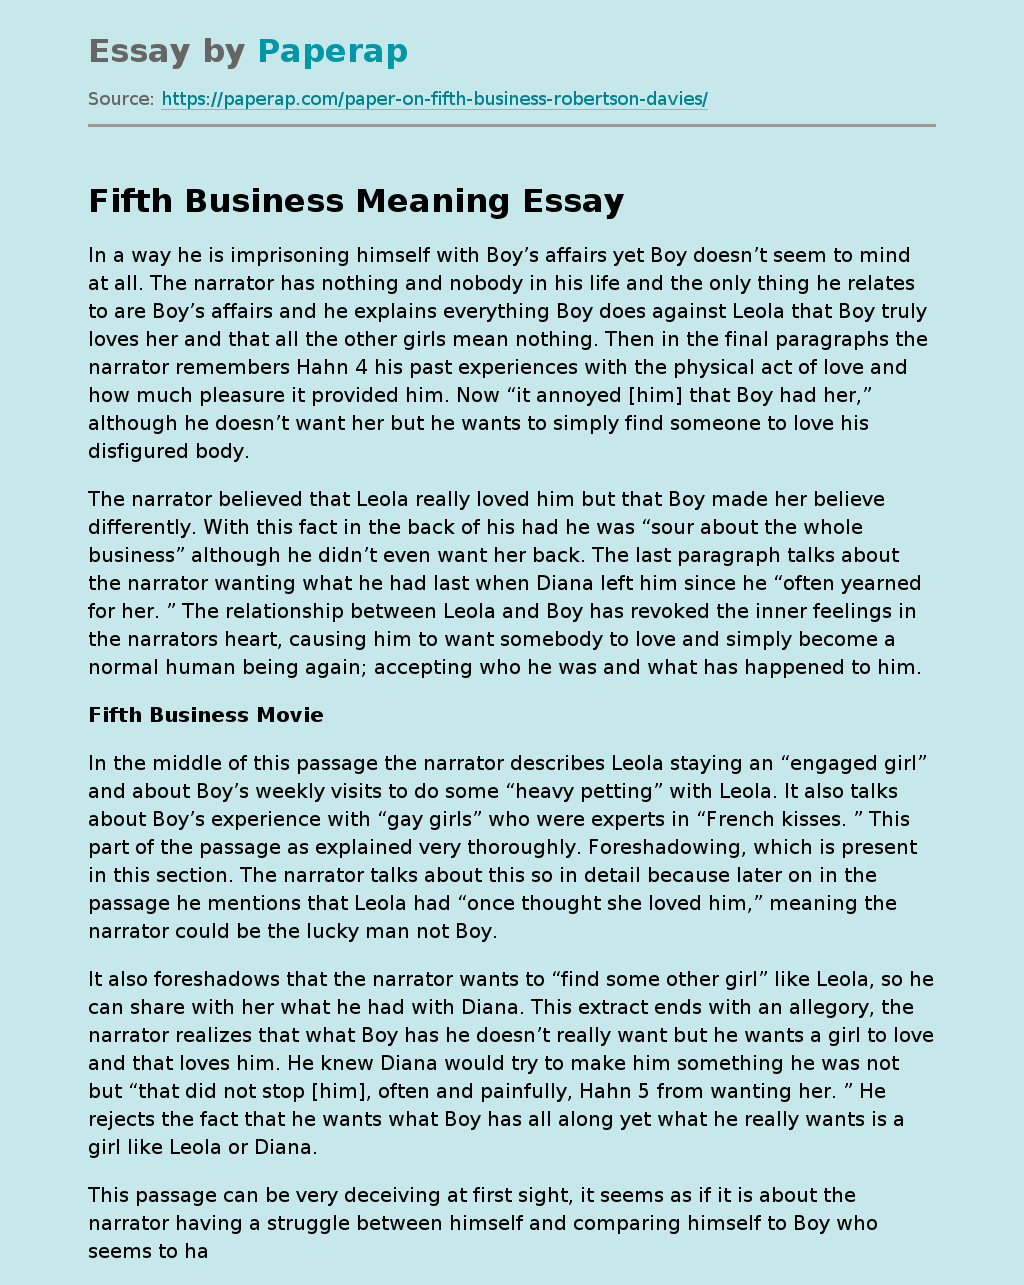 Fifth Business Meaning Movie